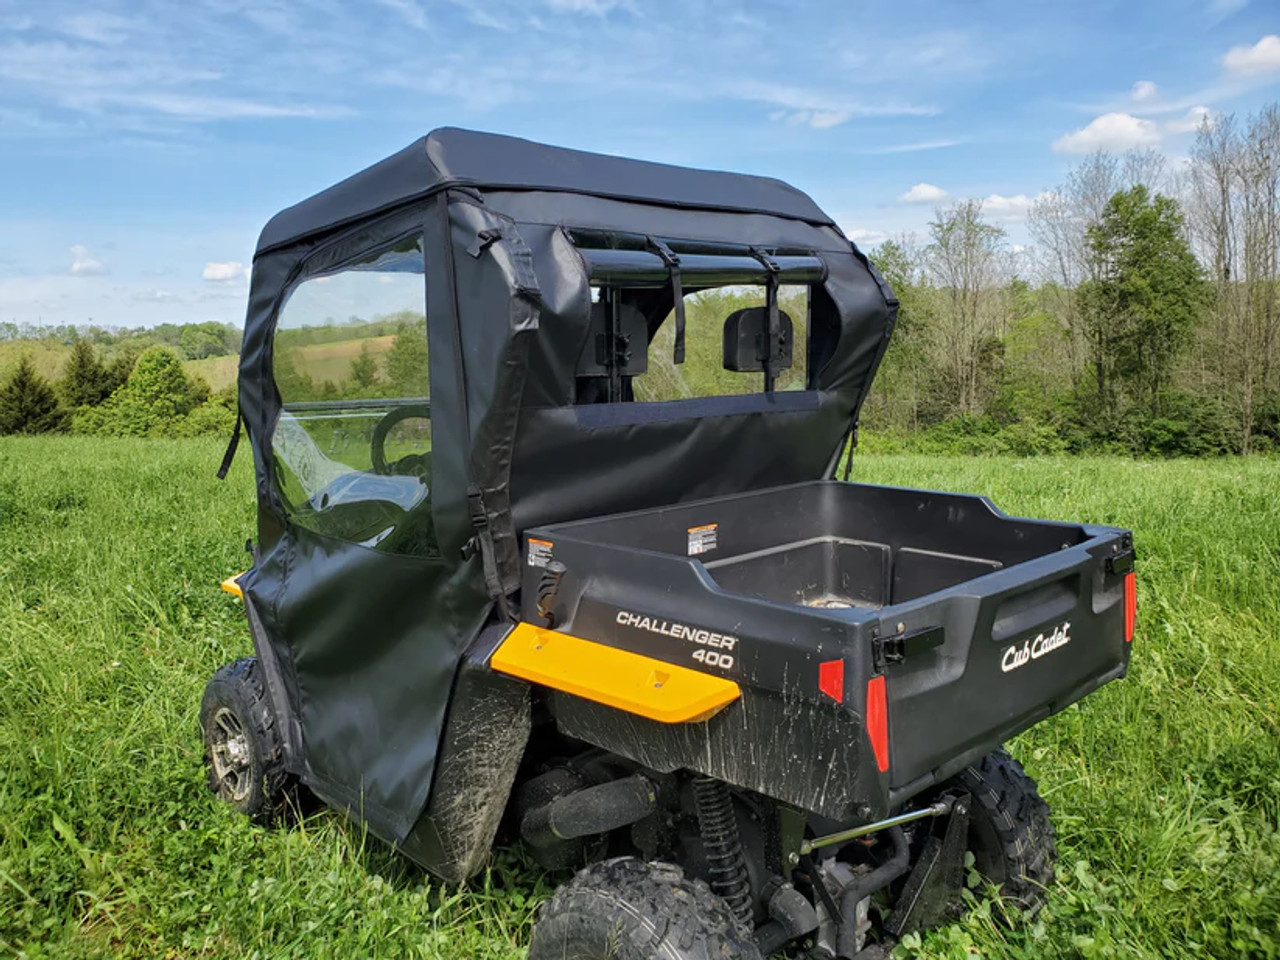 3 Star side x side Cub Cadet Challenger 400 full cab enclosure rear view